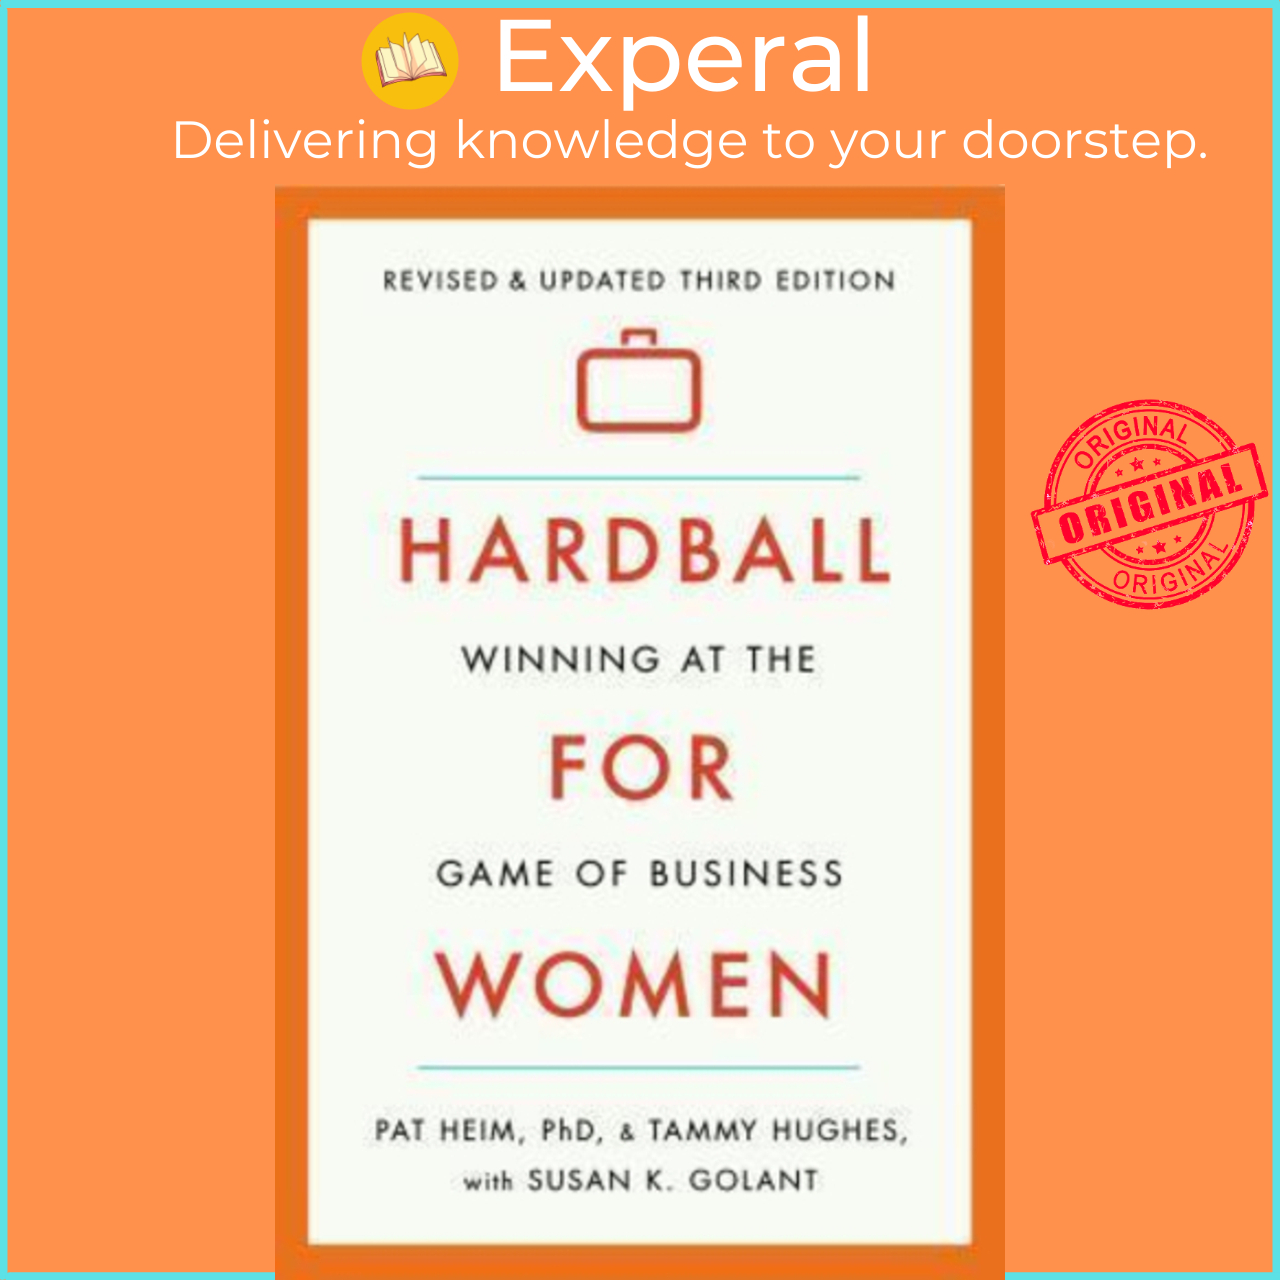 Winning at the Game of Business Third Edition Hardball for Women